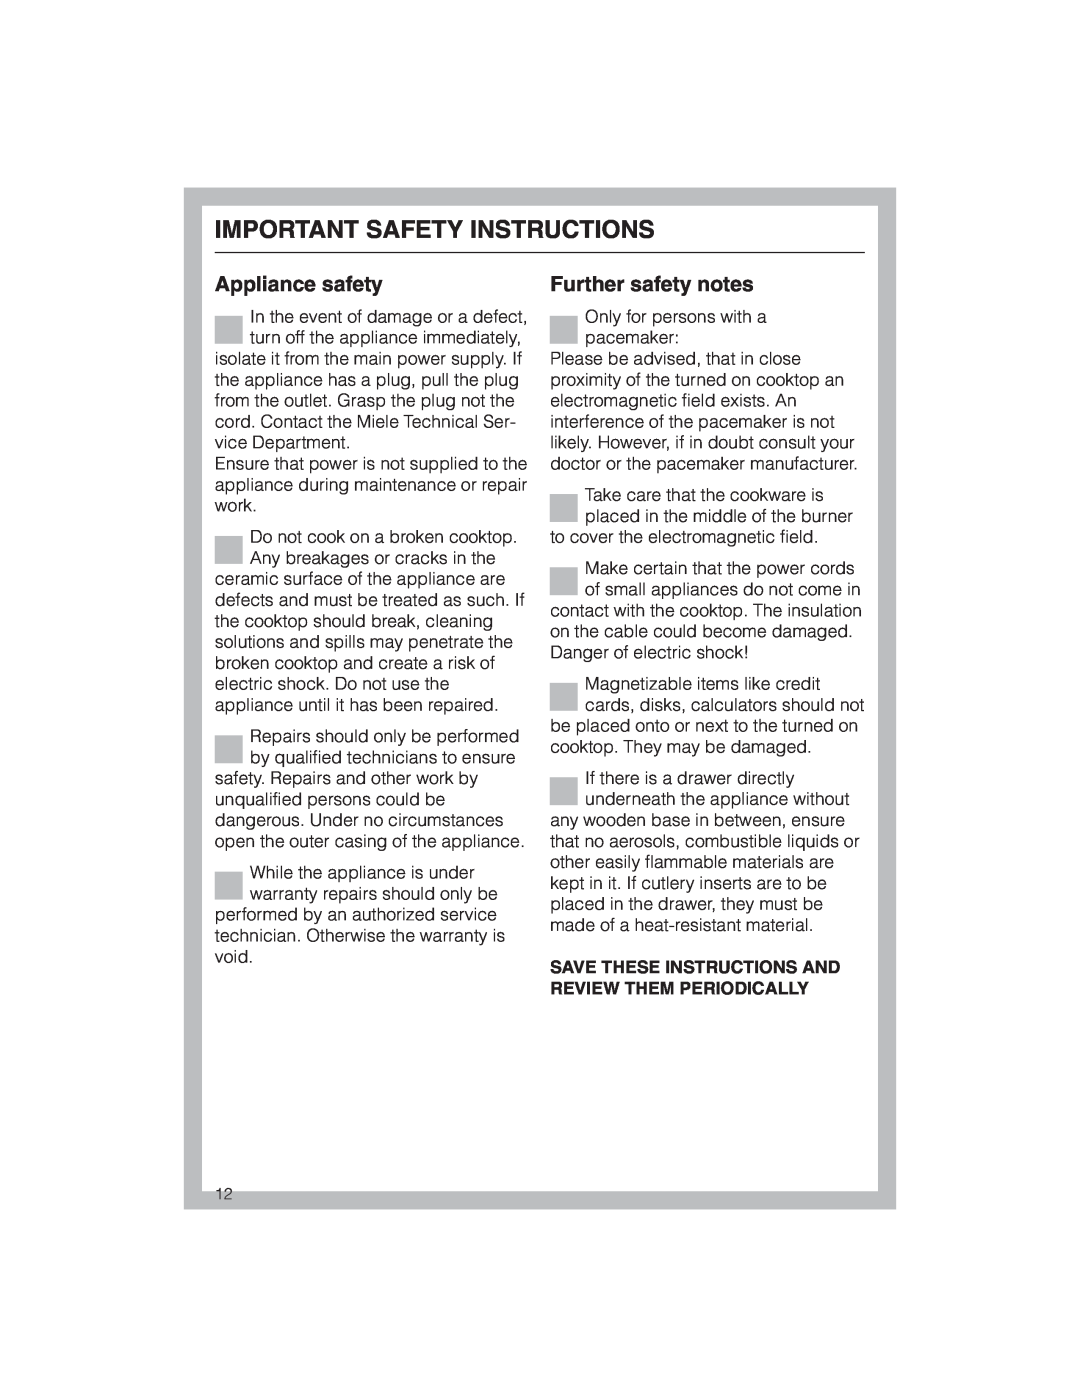 Miele KM 5773 installation instructions Appliance safety, Further safety notes, Important Safety Instructions 